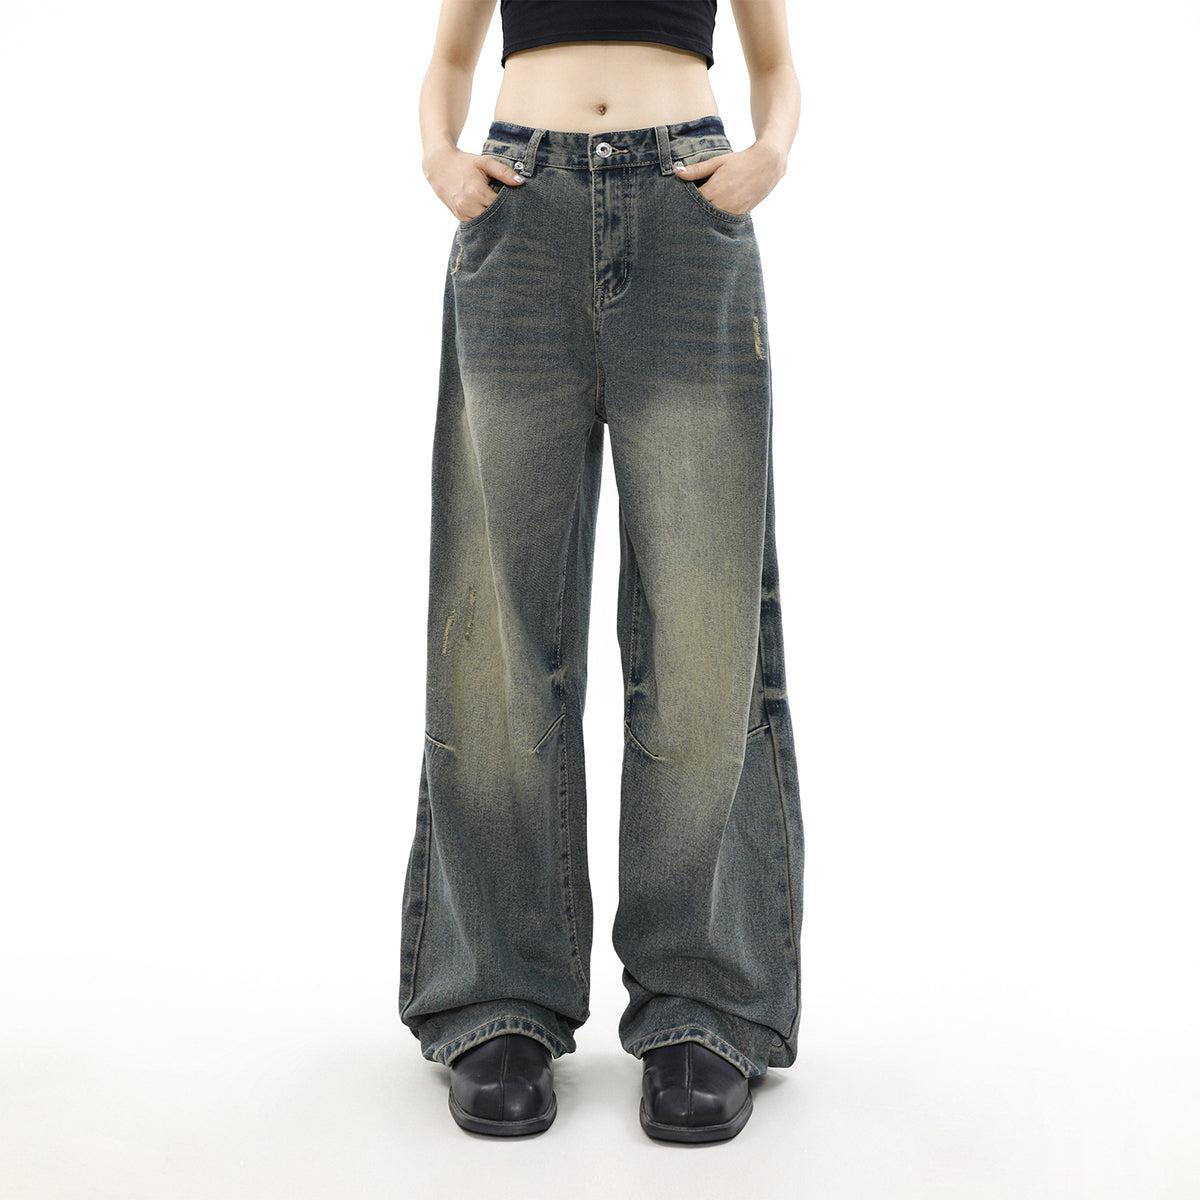 Mr Nearly Washed Scratch Cut Lines Loose Jeans Korean Street Fashion Jeans By Mr Nearly Shop Online at OH Vault